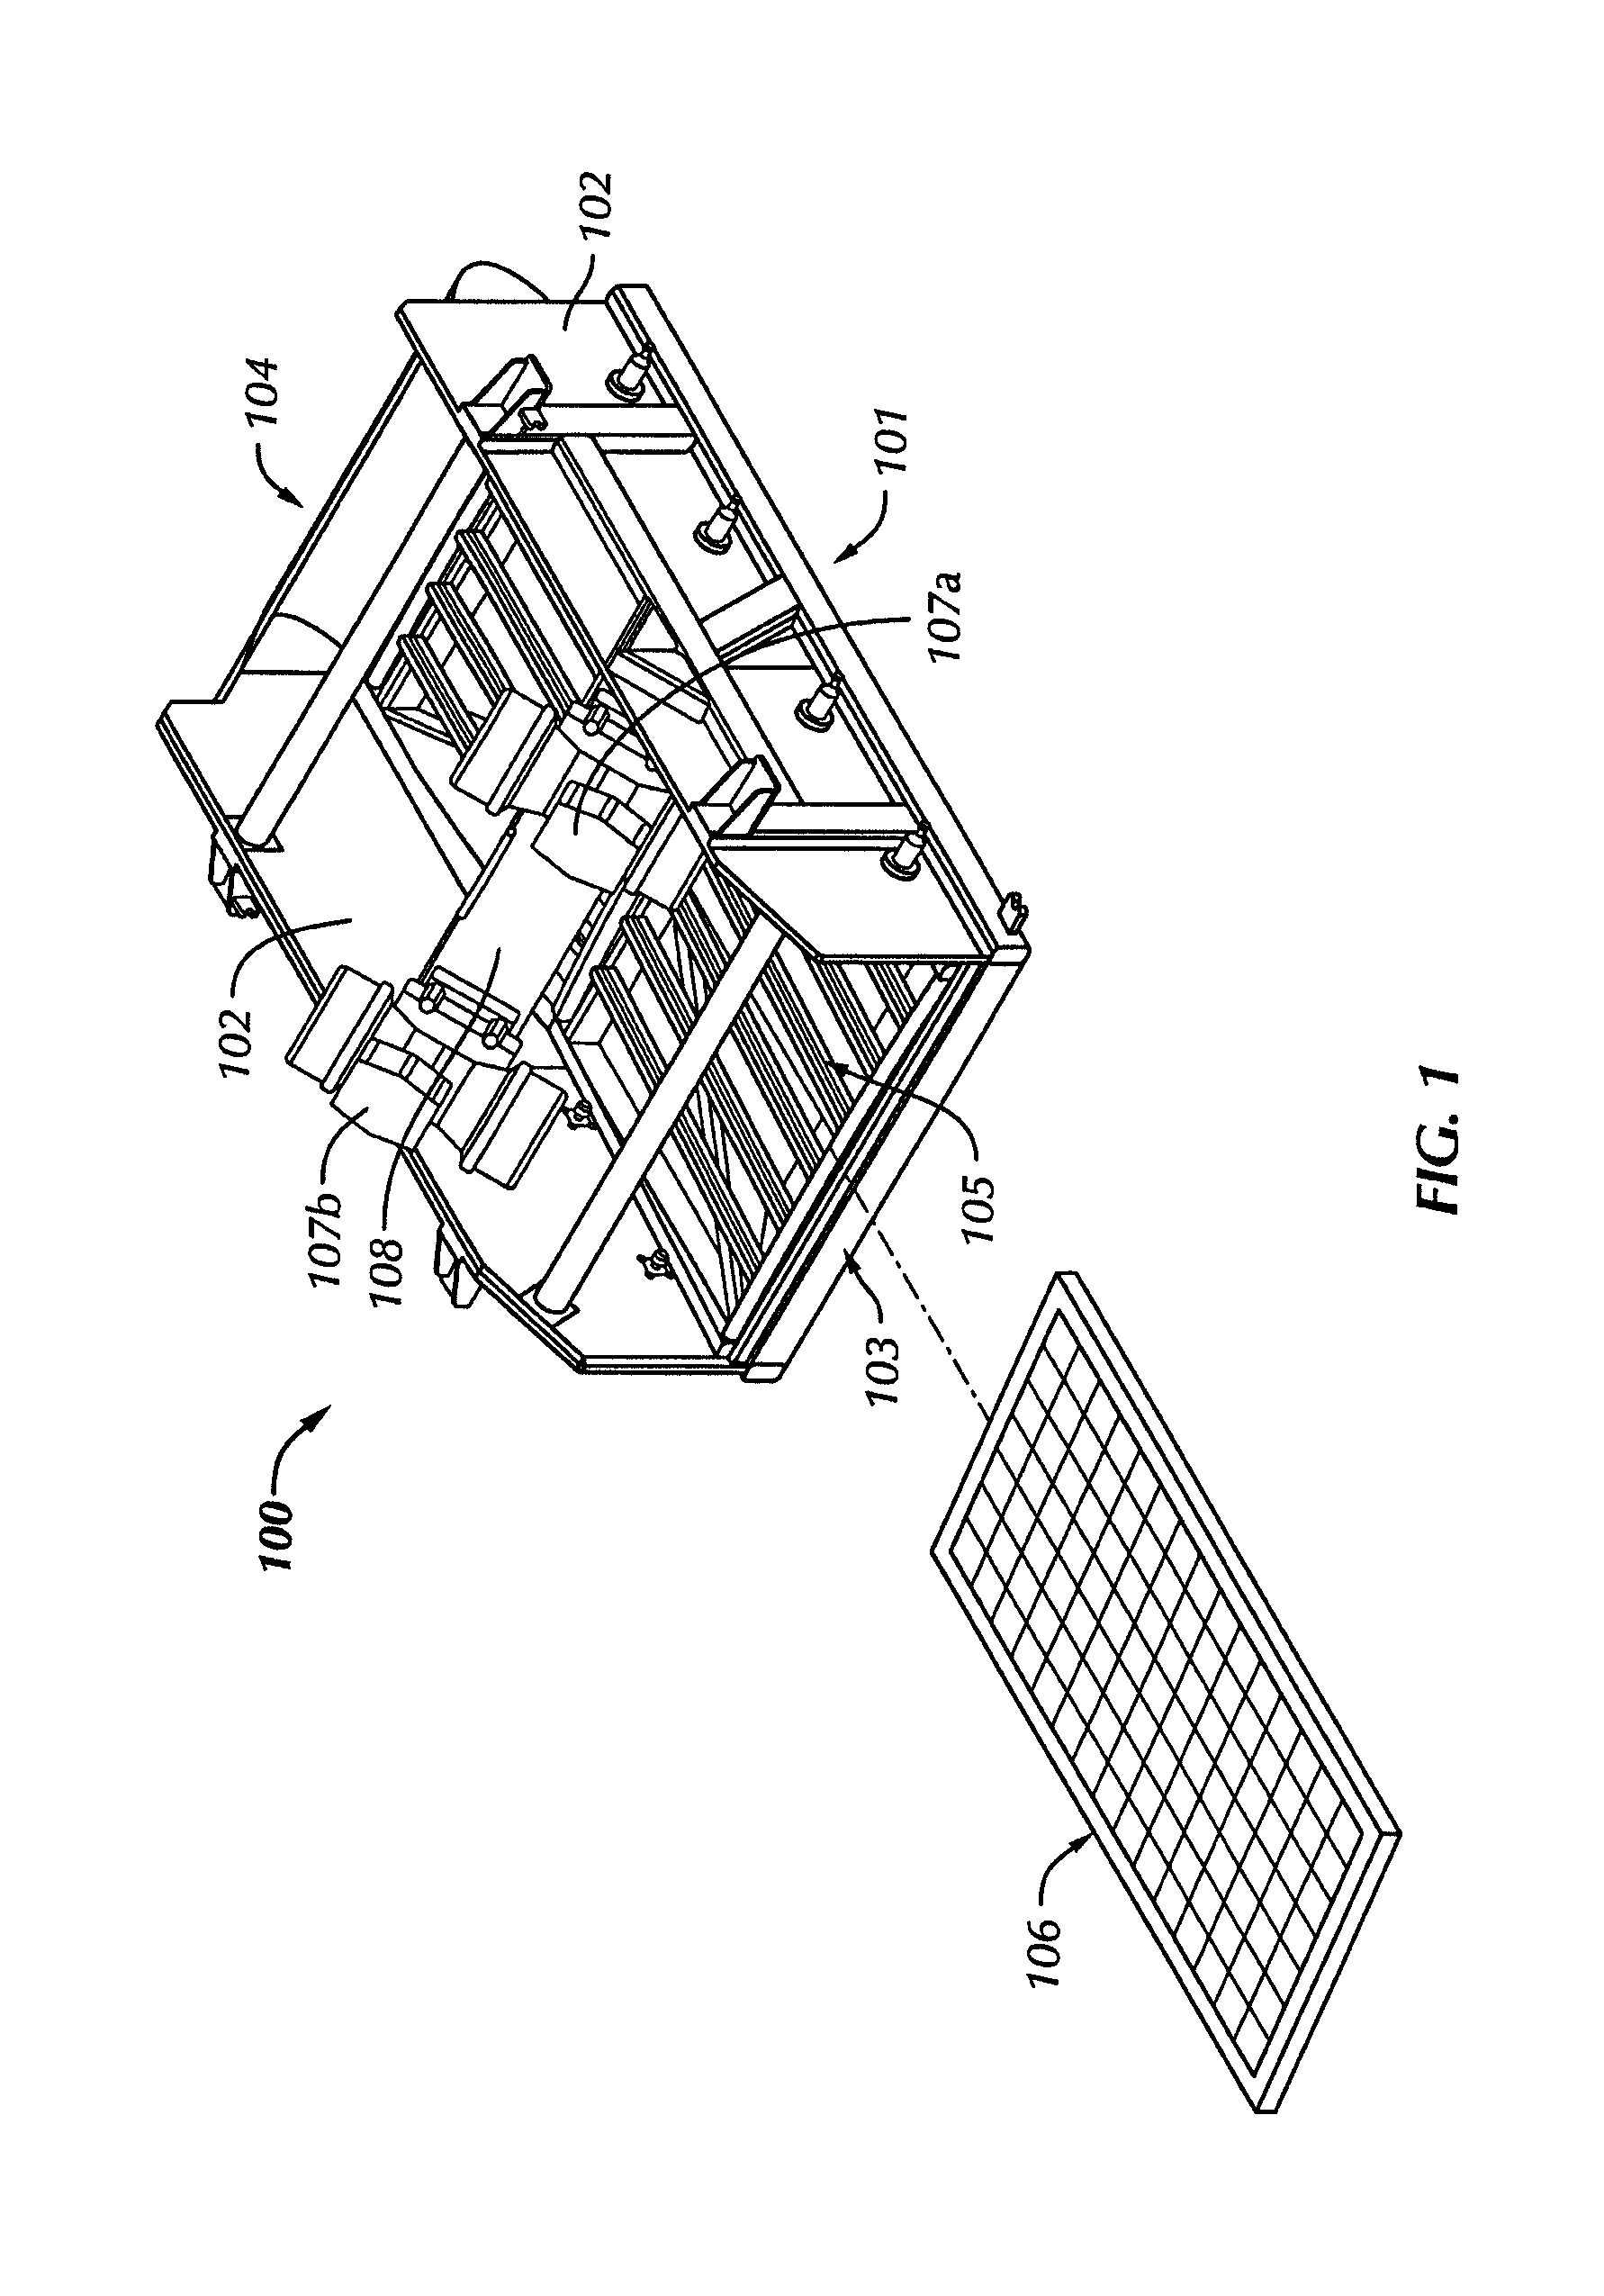 Methods to increase force and change vibratory separator motion